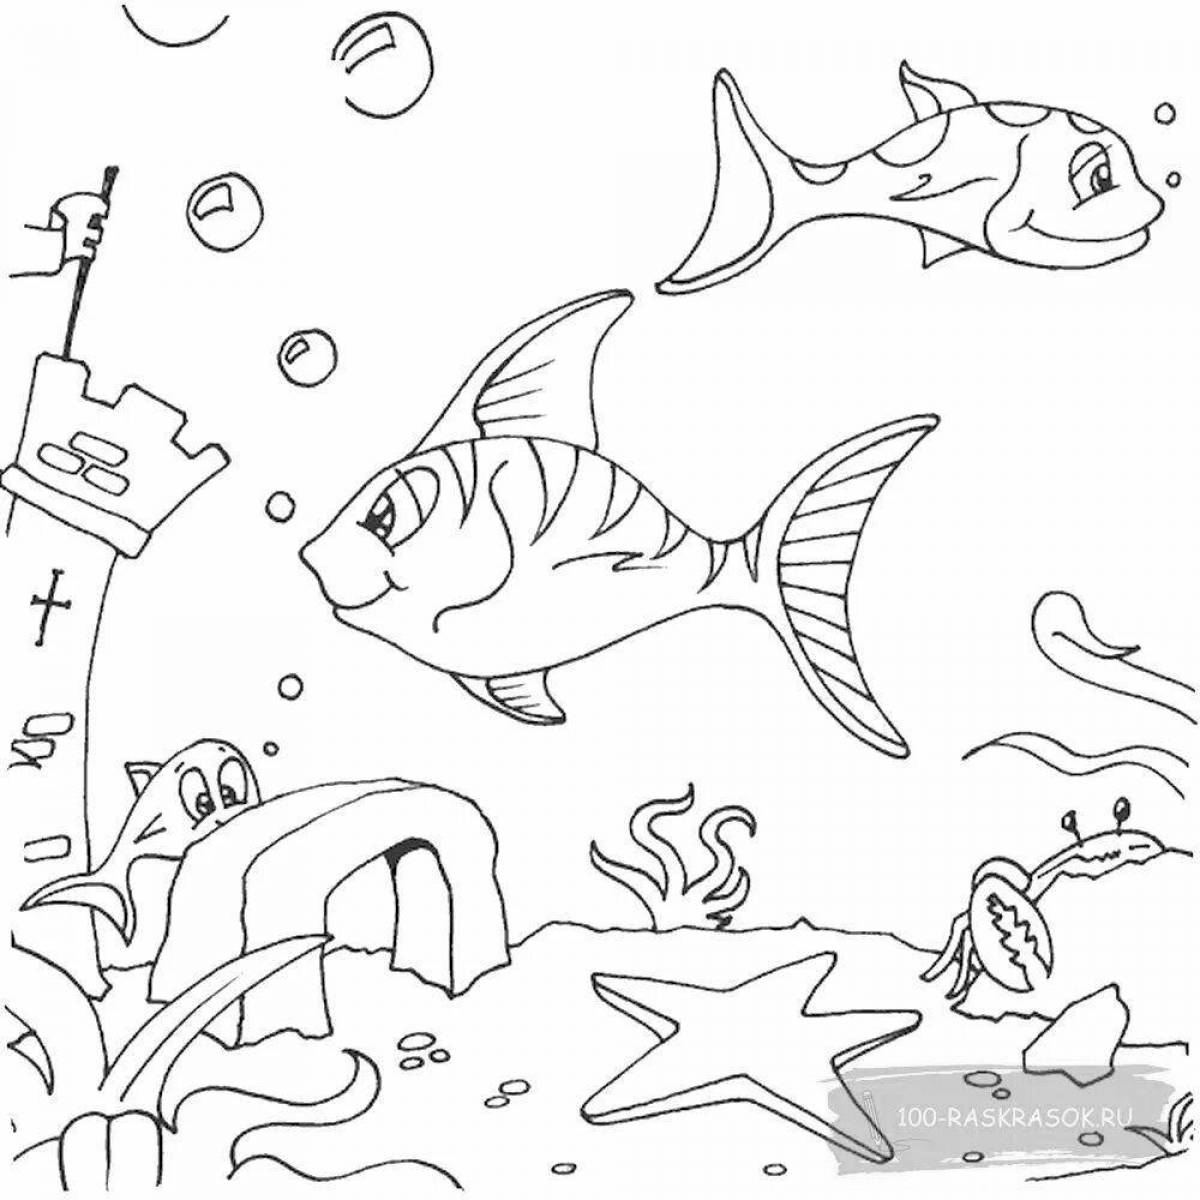 Coloring page of the fascinating underwater world